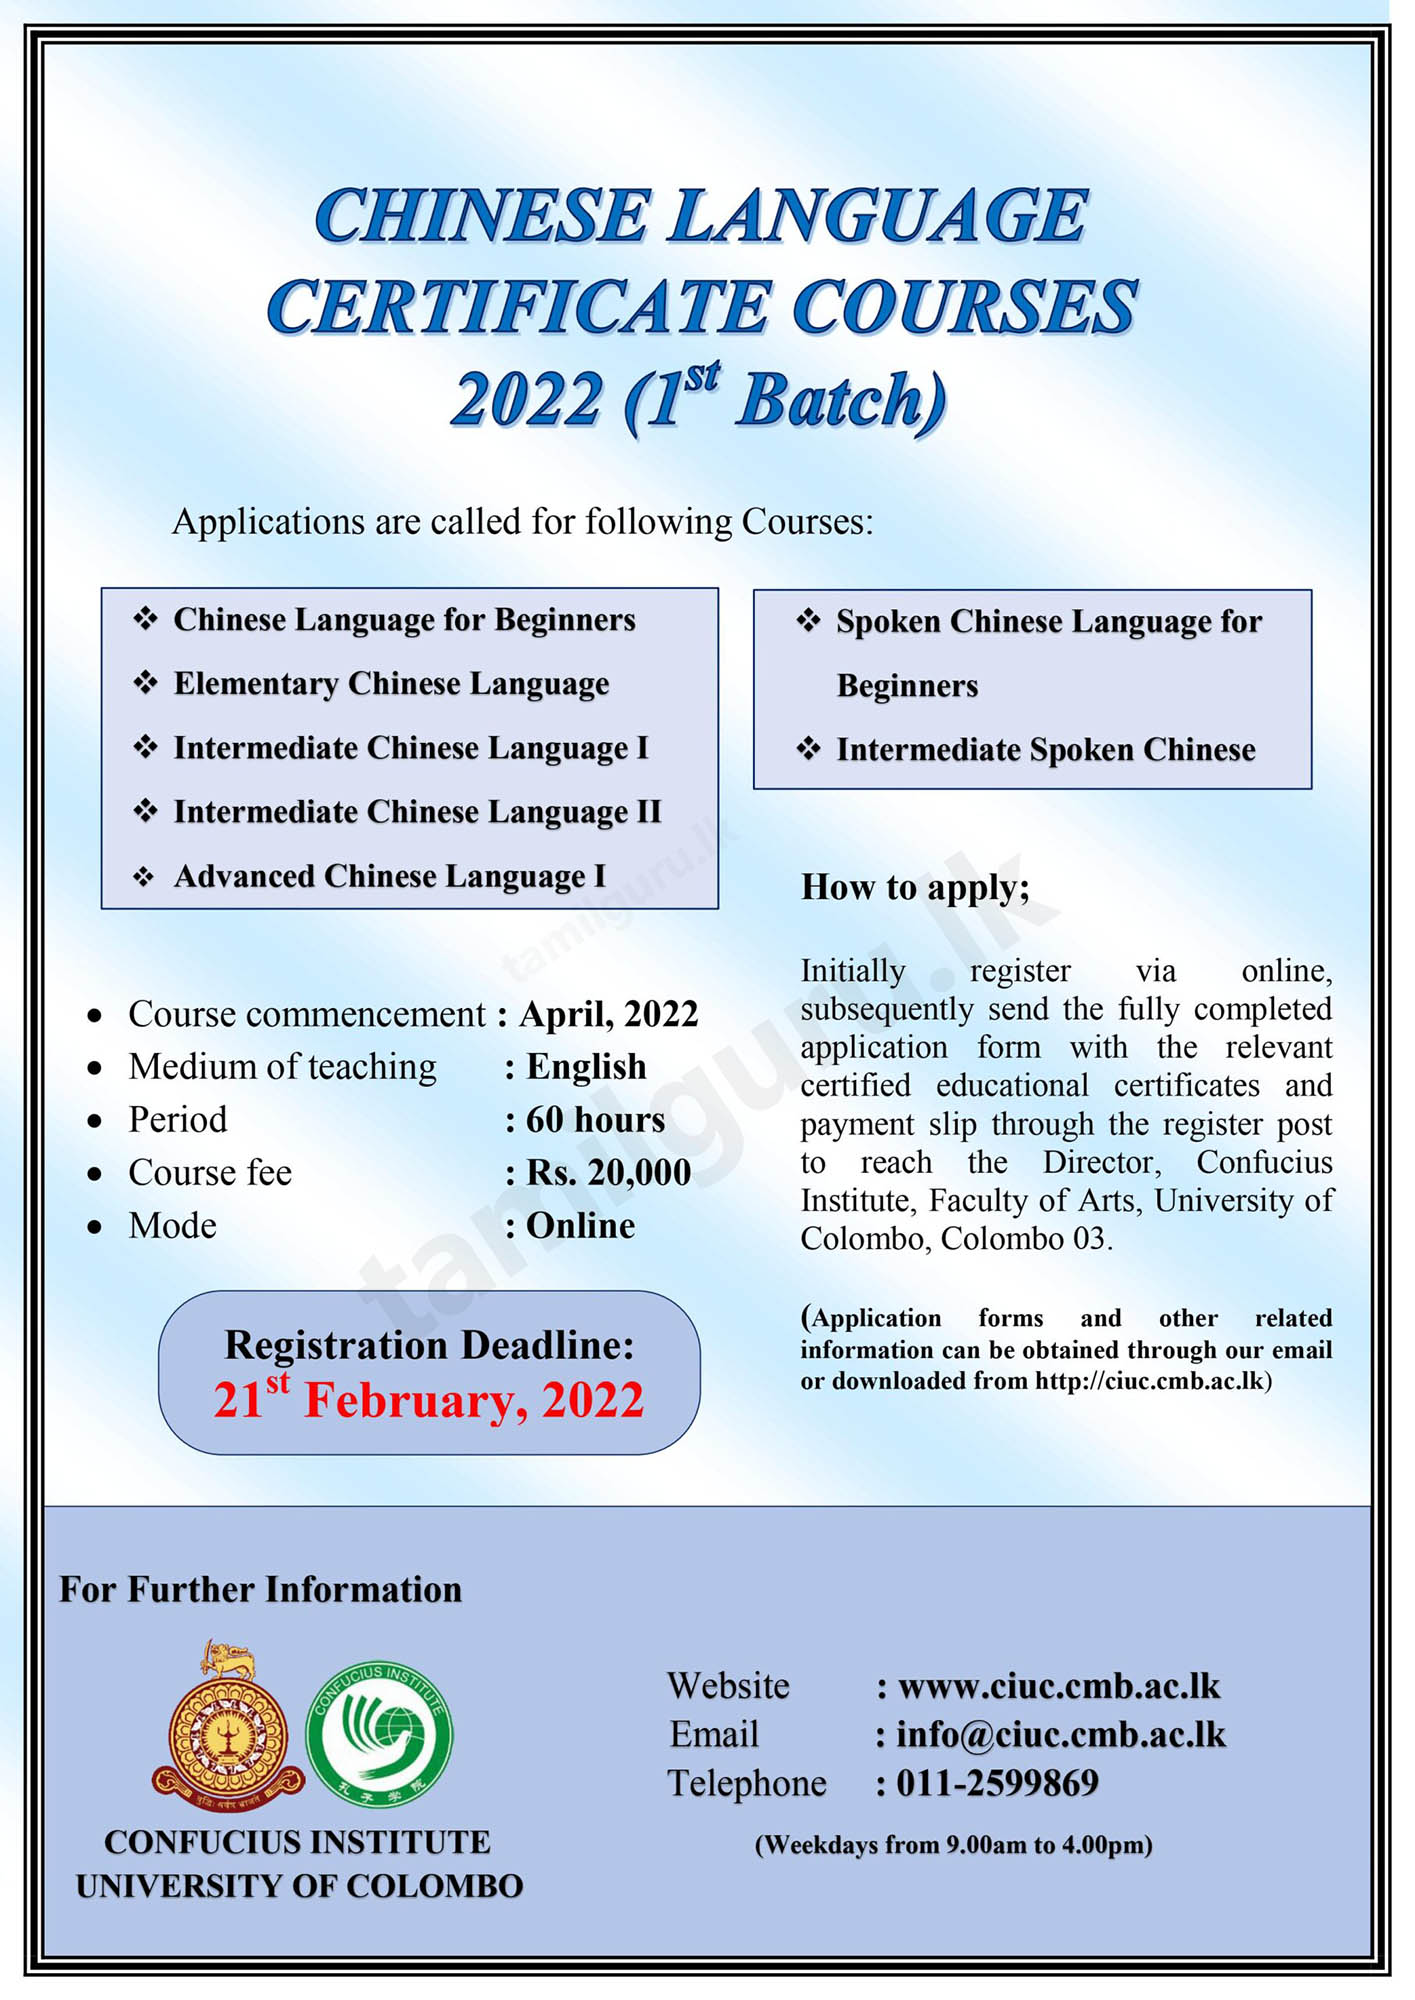 Calling Applications for Online Chinese Language Certificate Courses 2022 (1st Batch) - University of Colombo (Confucius Institute) - Notice in English